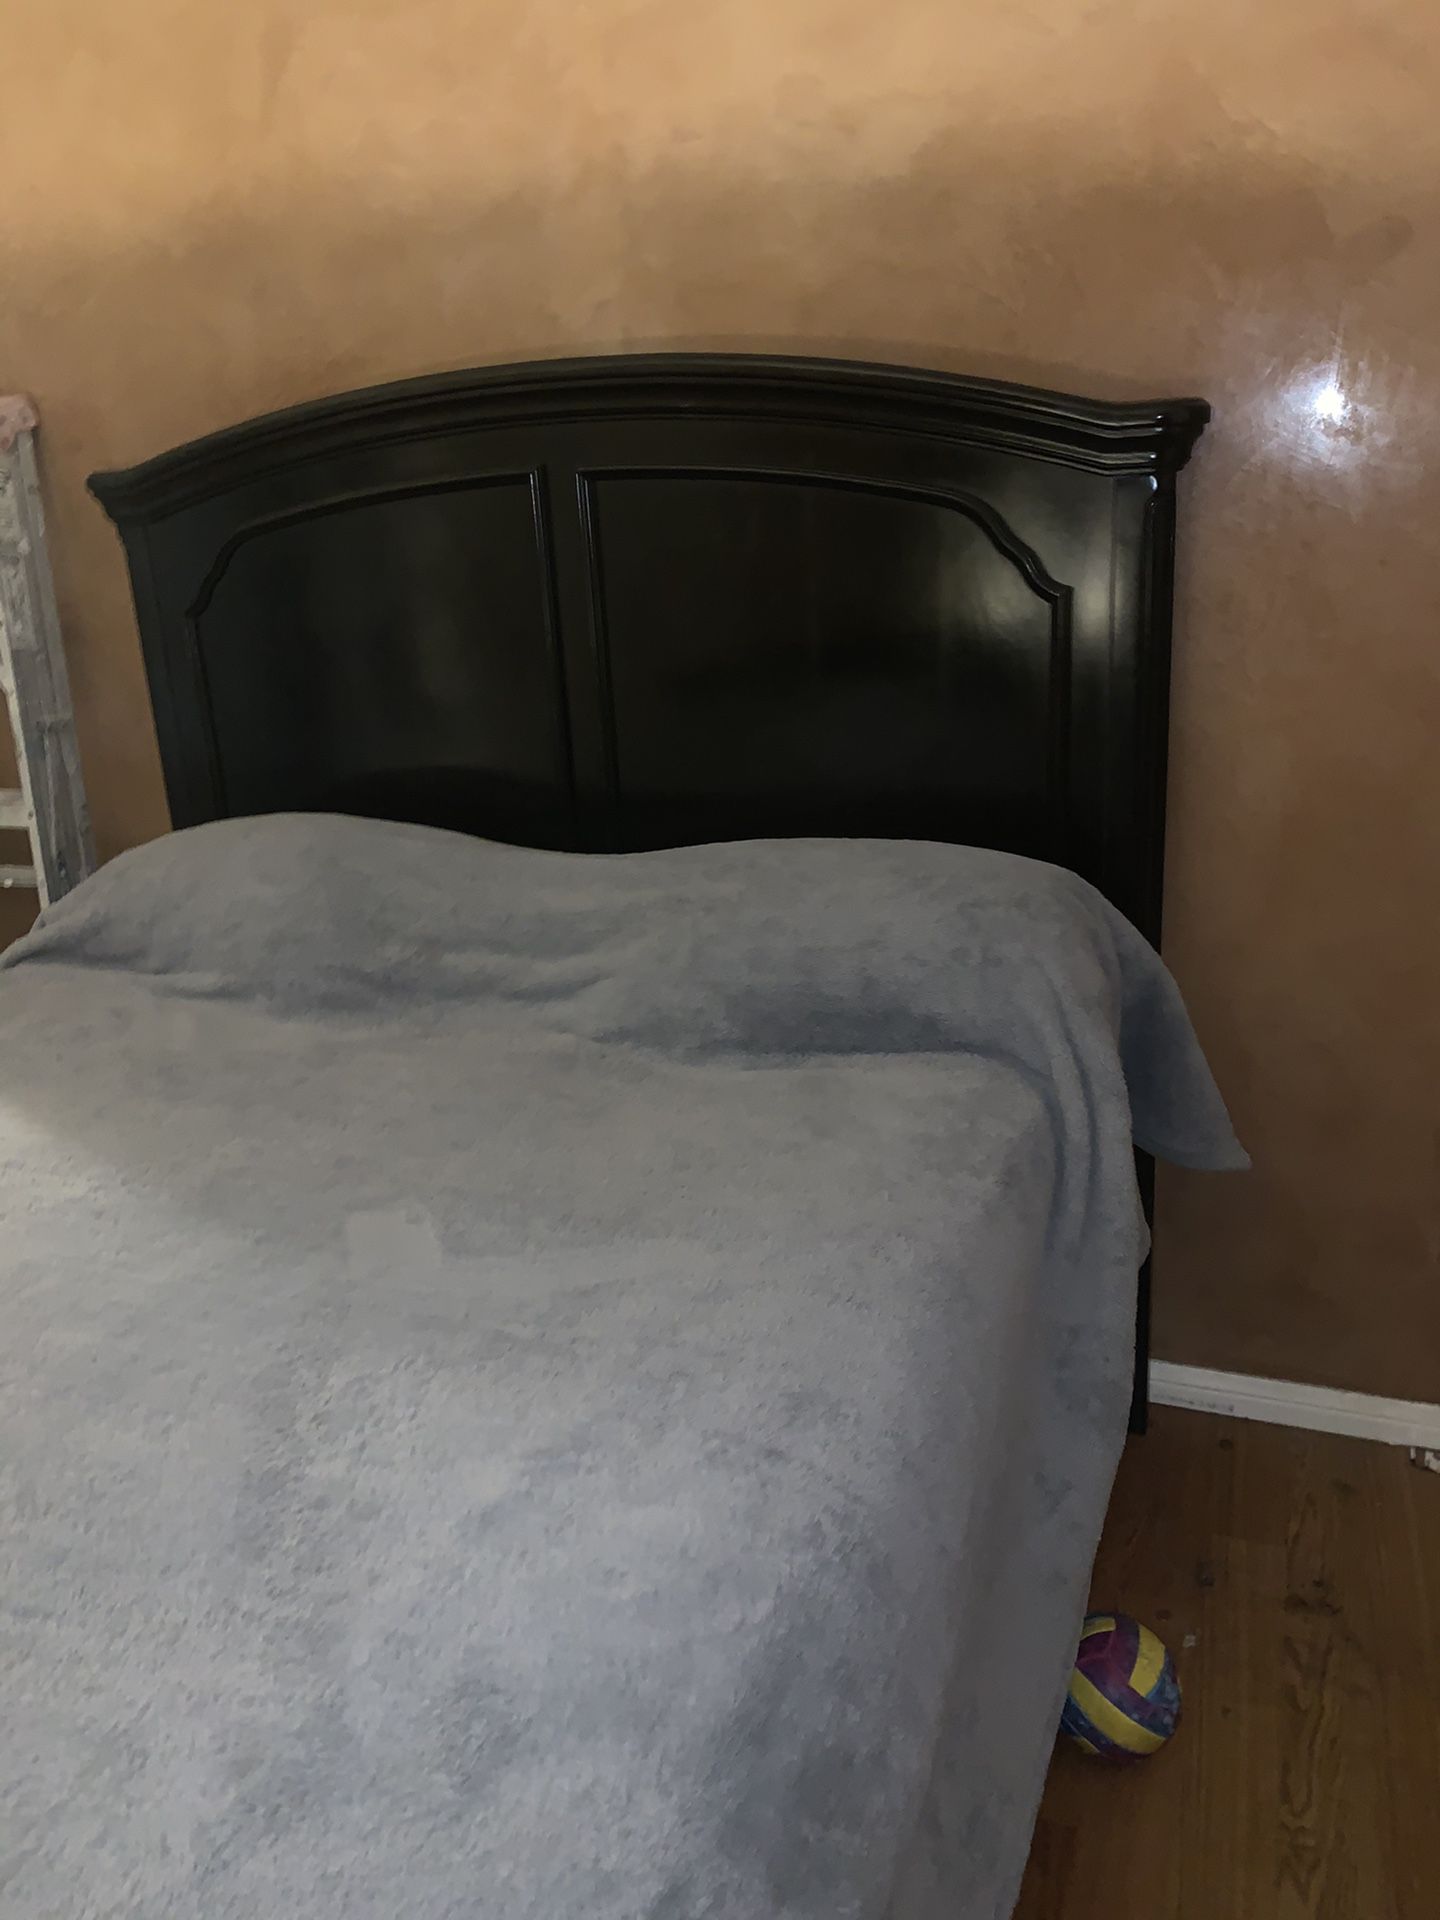 Bed and dresser free